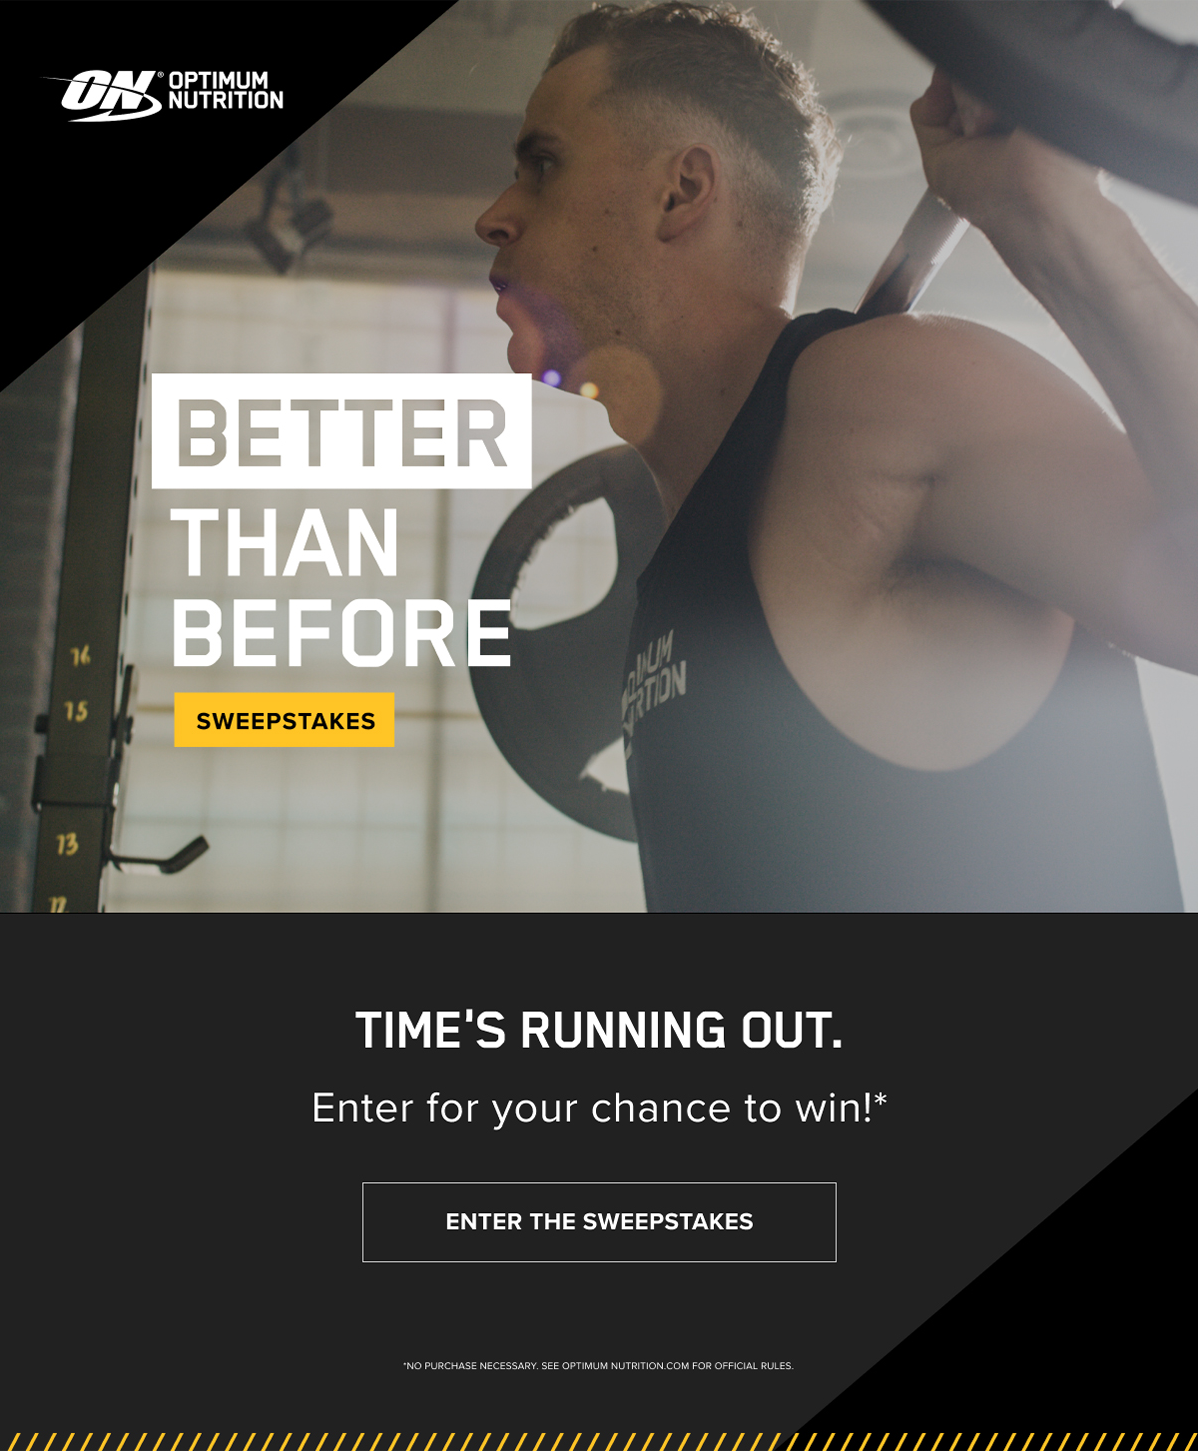 Better Than Before Sweepstakes: TIME''S RUNNING OUT. Enter for your chance to win!*